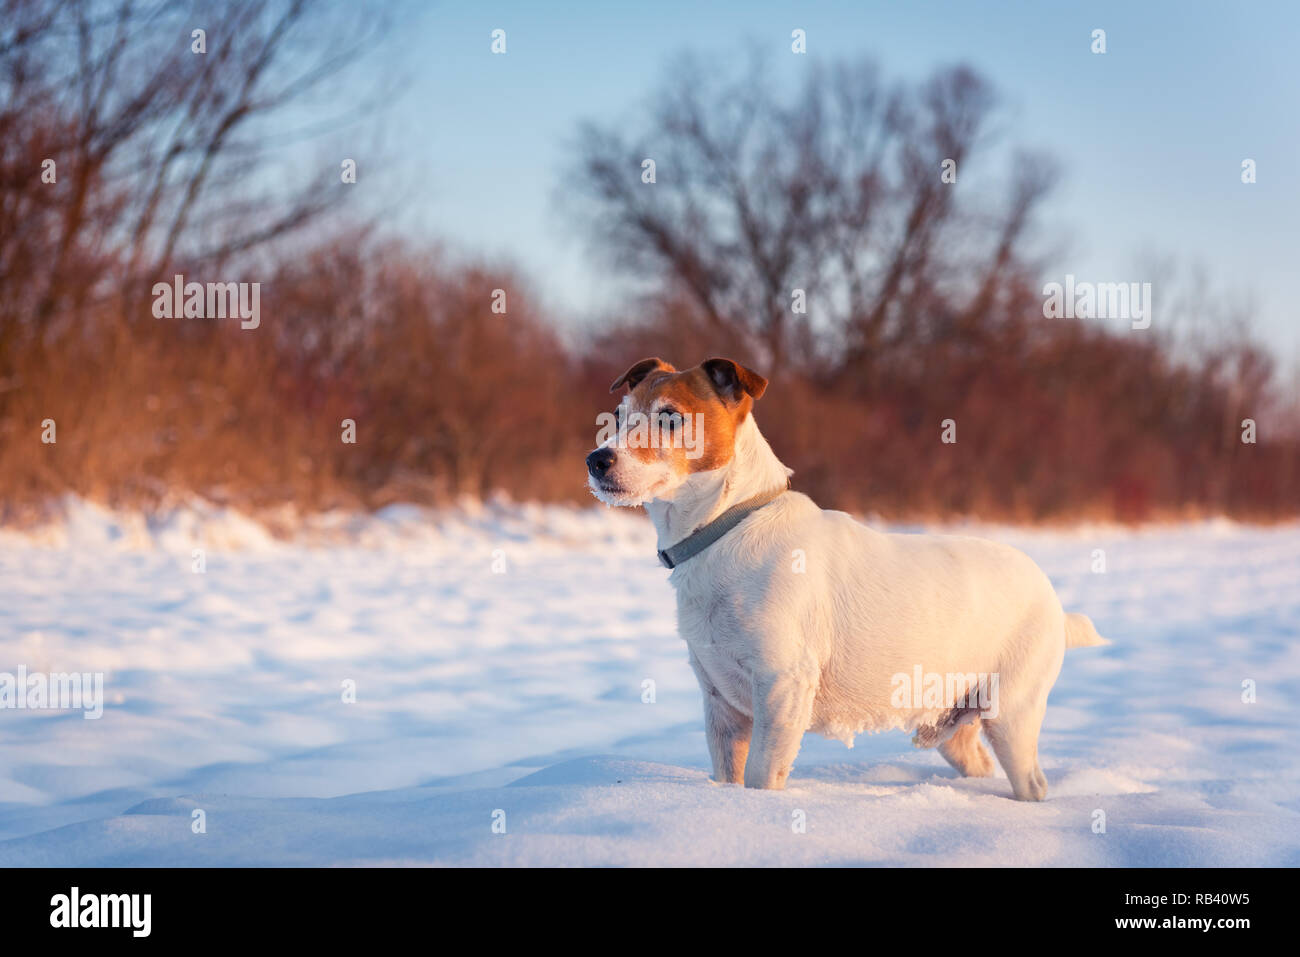 White jack russel terrier puppy on snowy field. Adult dog with serious gaze Stock Photo